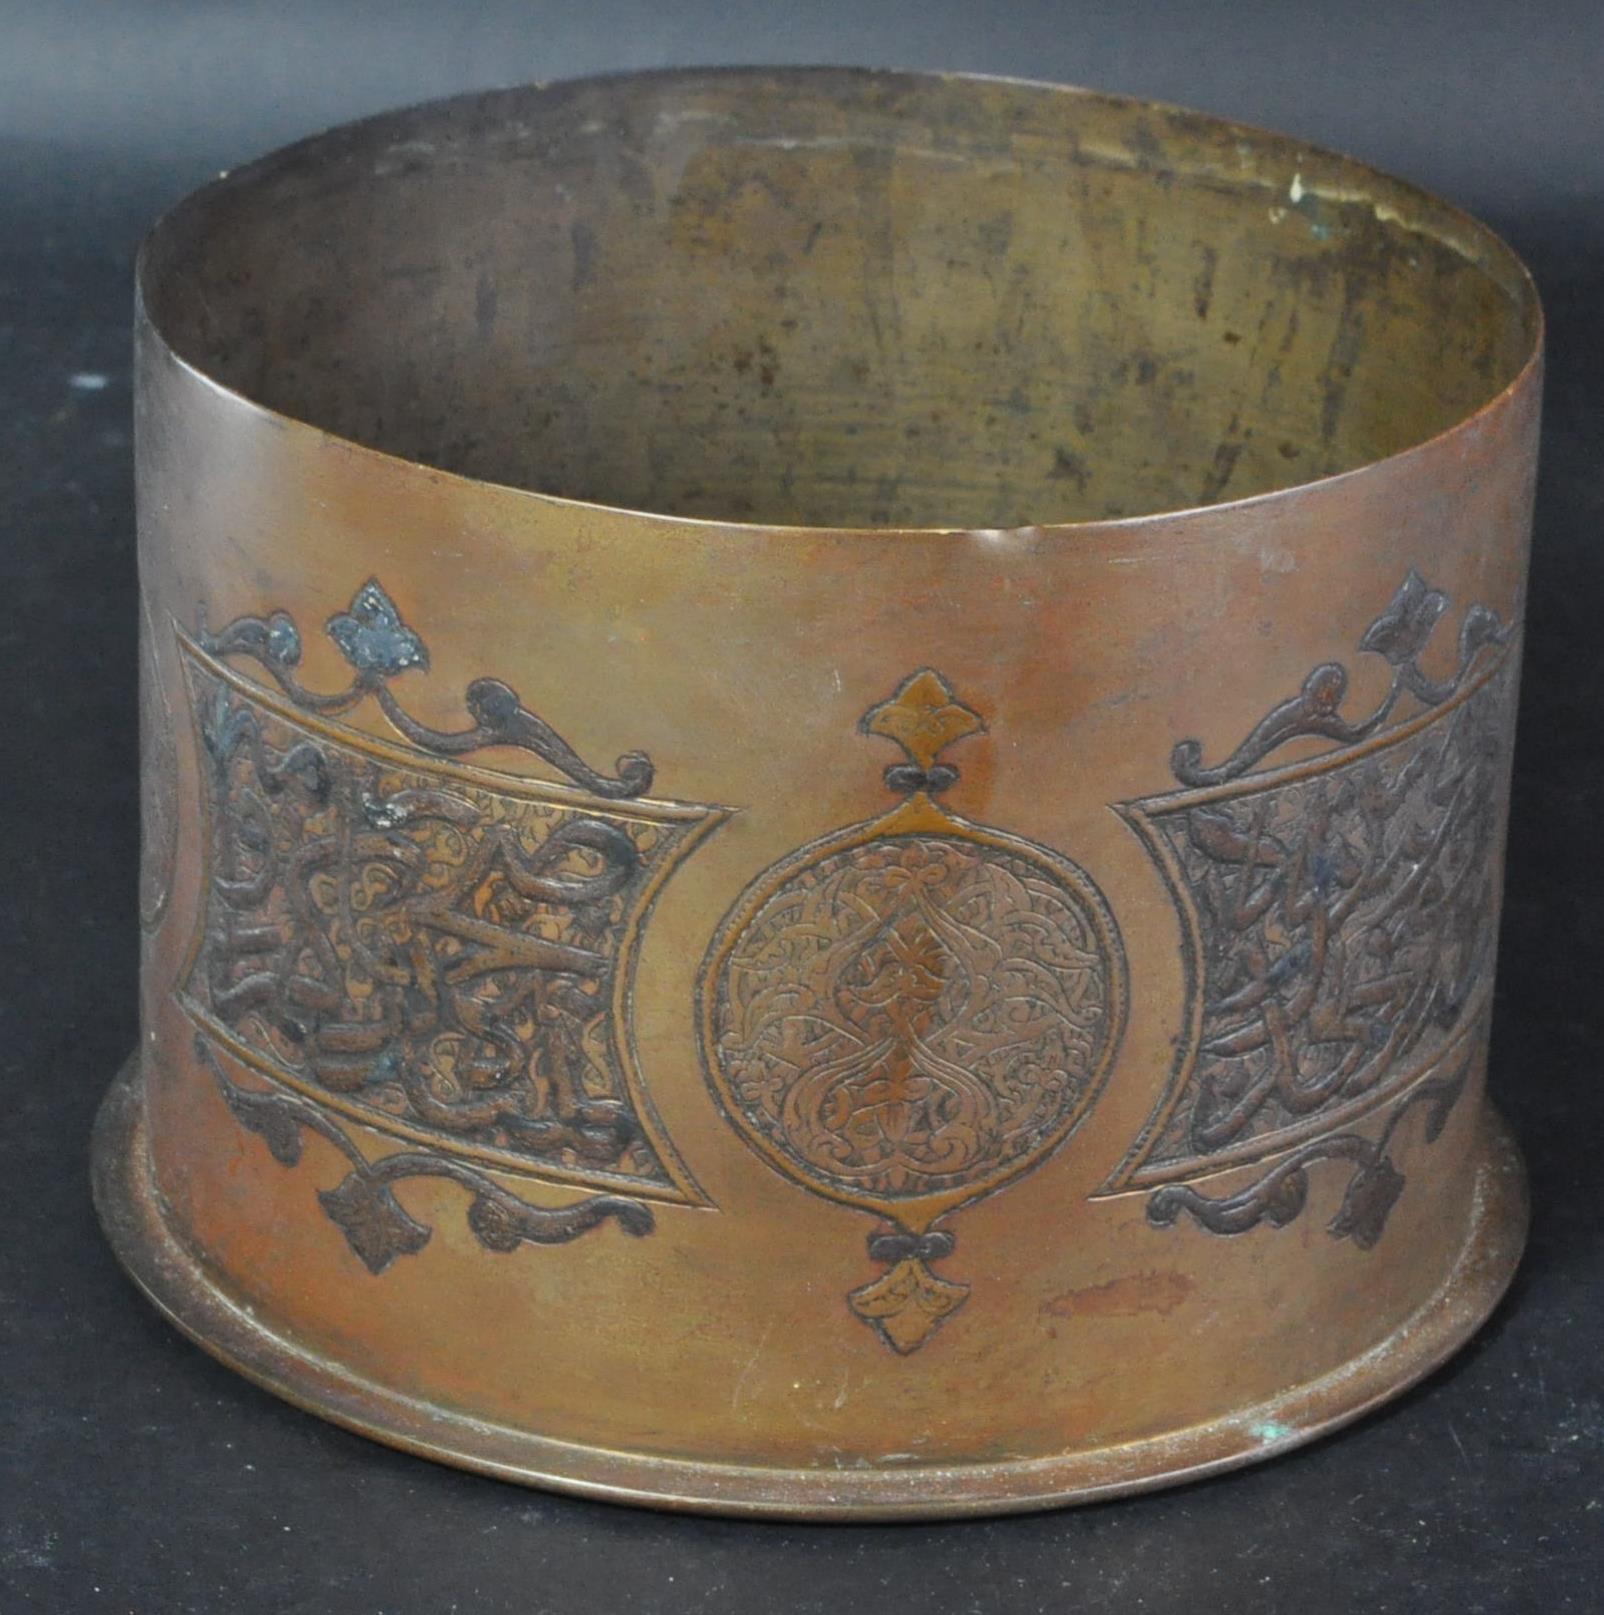 WWI FIRST WORLD WAR 1917 DATED ENGRAVED TRENCH ART ASHTRAY